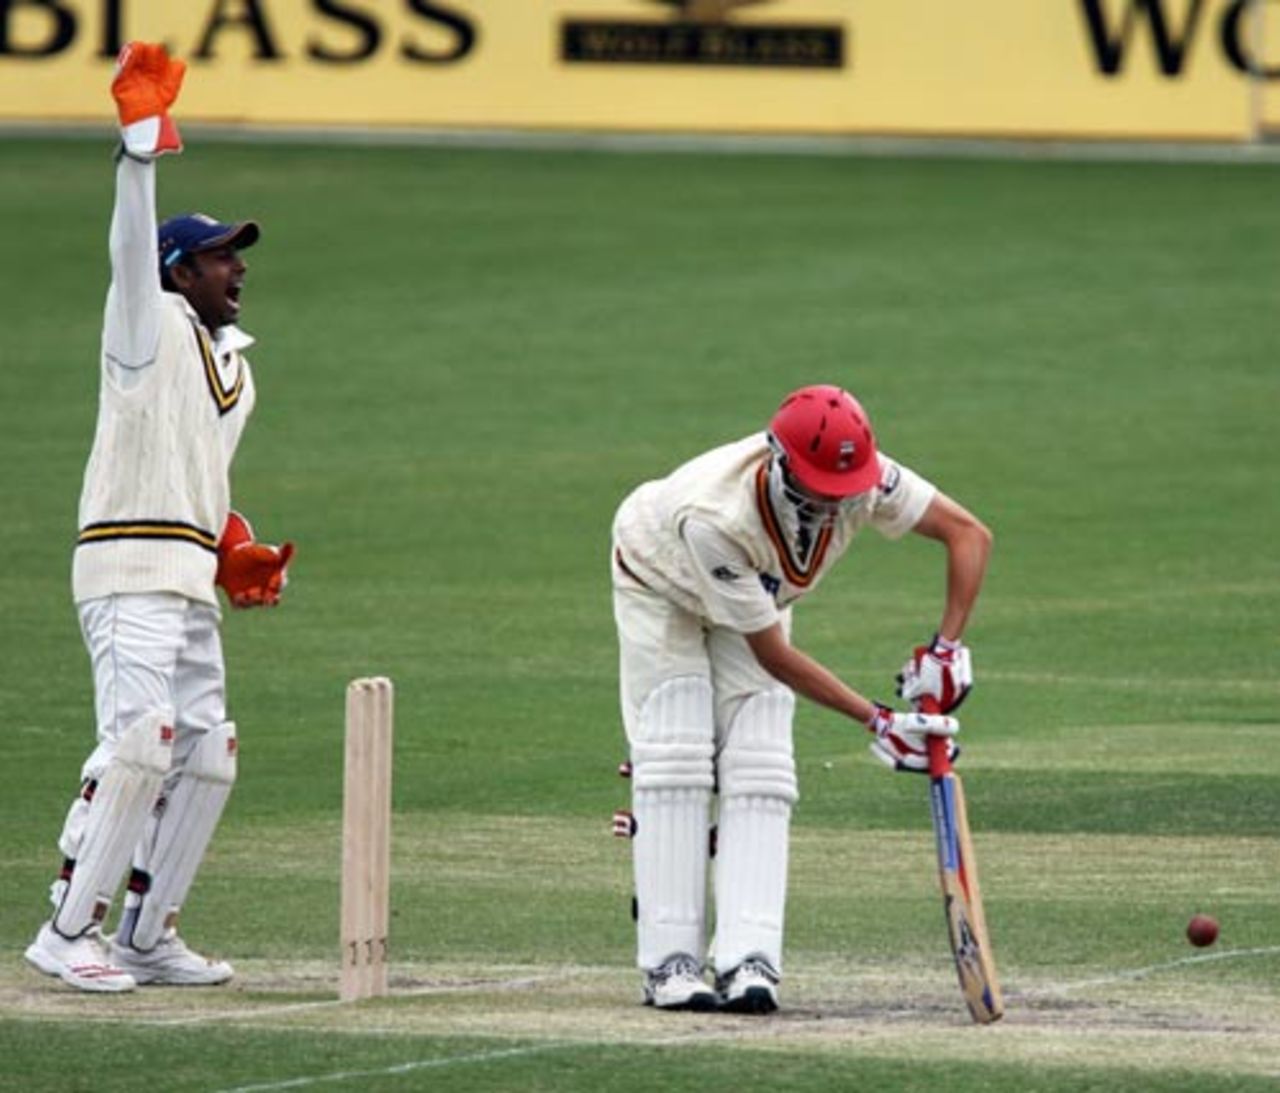 Cullen Bailey trapped in front by Muttiah Muralitharan, Cricket Australia Chairman's XI v Sri Lankans, 3rd day, Adelaide, October 29, 2007